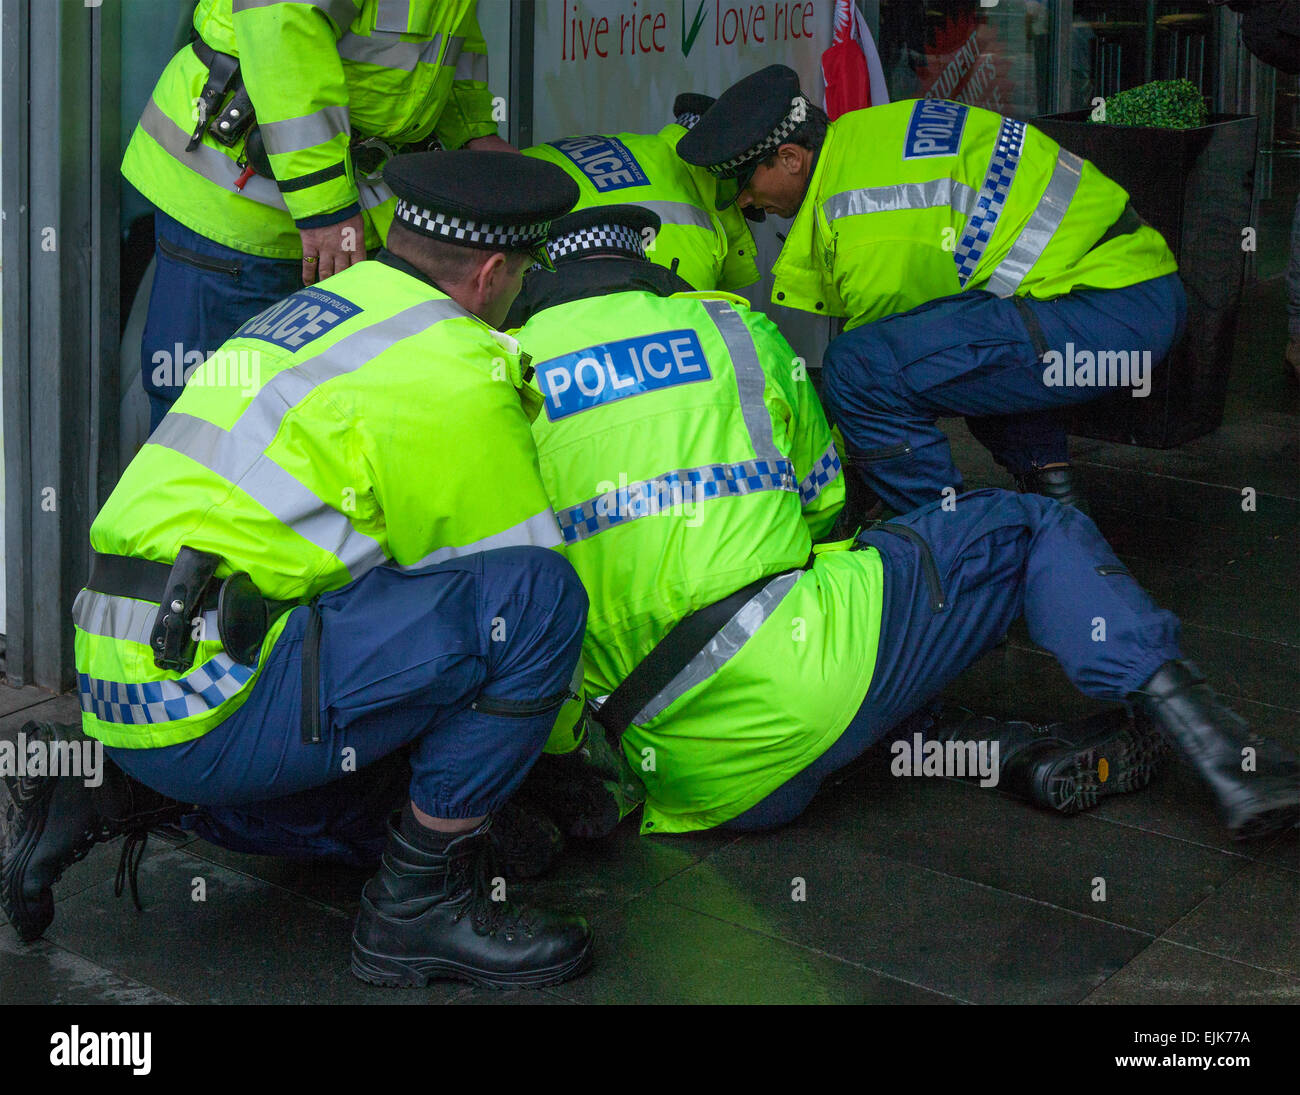 Manchester, UK 28th March, 2015. Protesters restrained after a confrontation with five arresting uniformed police officers, at the National Front & White Pride Demo in Piccadilly. Arrests were made as Far Right 'White Pride' group gathered in Manchester to stage a demonstration when about 50 members of the group waved flags and marched through Piccadilly Gardens. Anti-fascist campaigners staged a counter-demonstration and police line separated the two sides. Greater Manchester Police said two arrests were made, one for a breach of the peace. The second was also held for a public order offence. Stock Photo